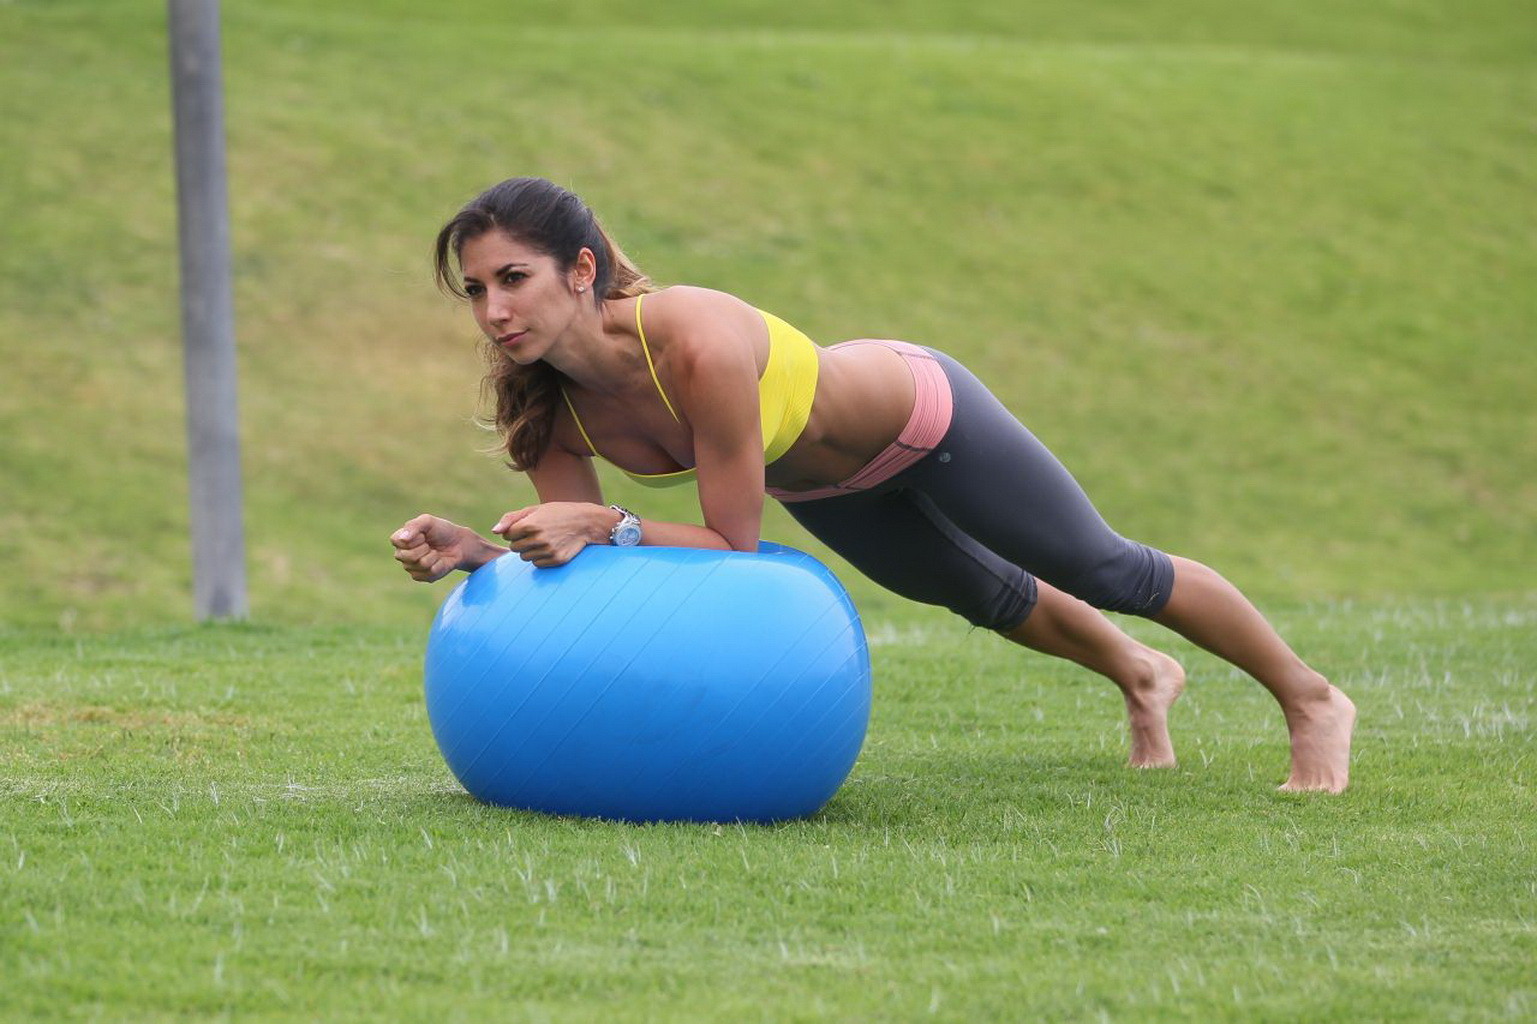 Leilani Dowding practicing yoga in a sports bra and leggings at the park in LA #75201915